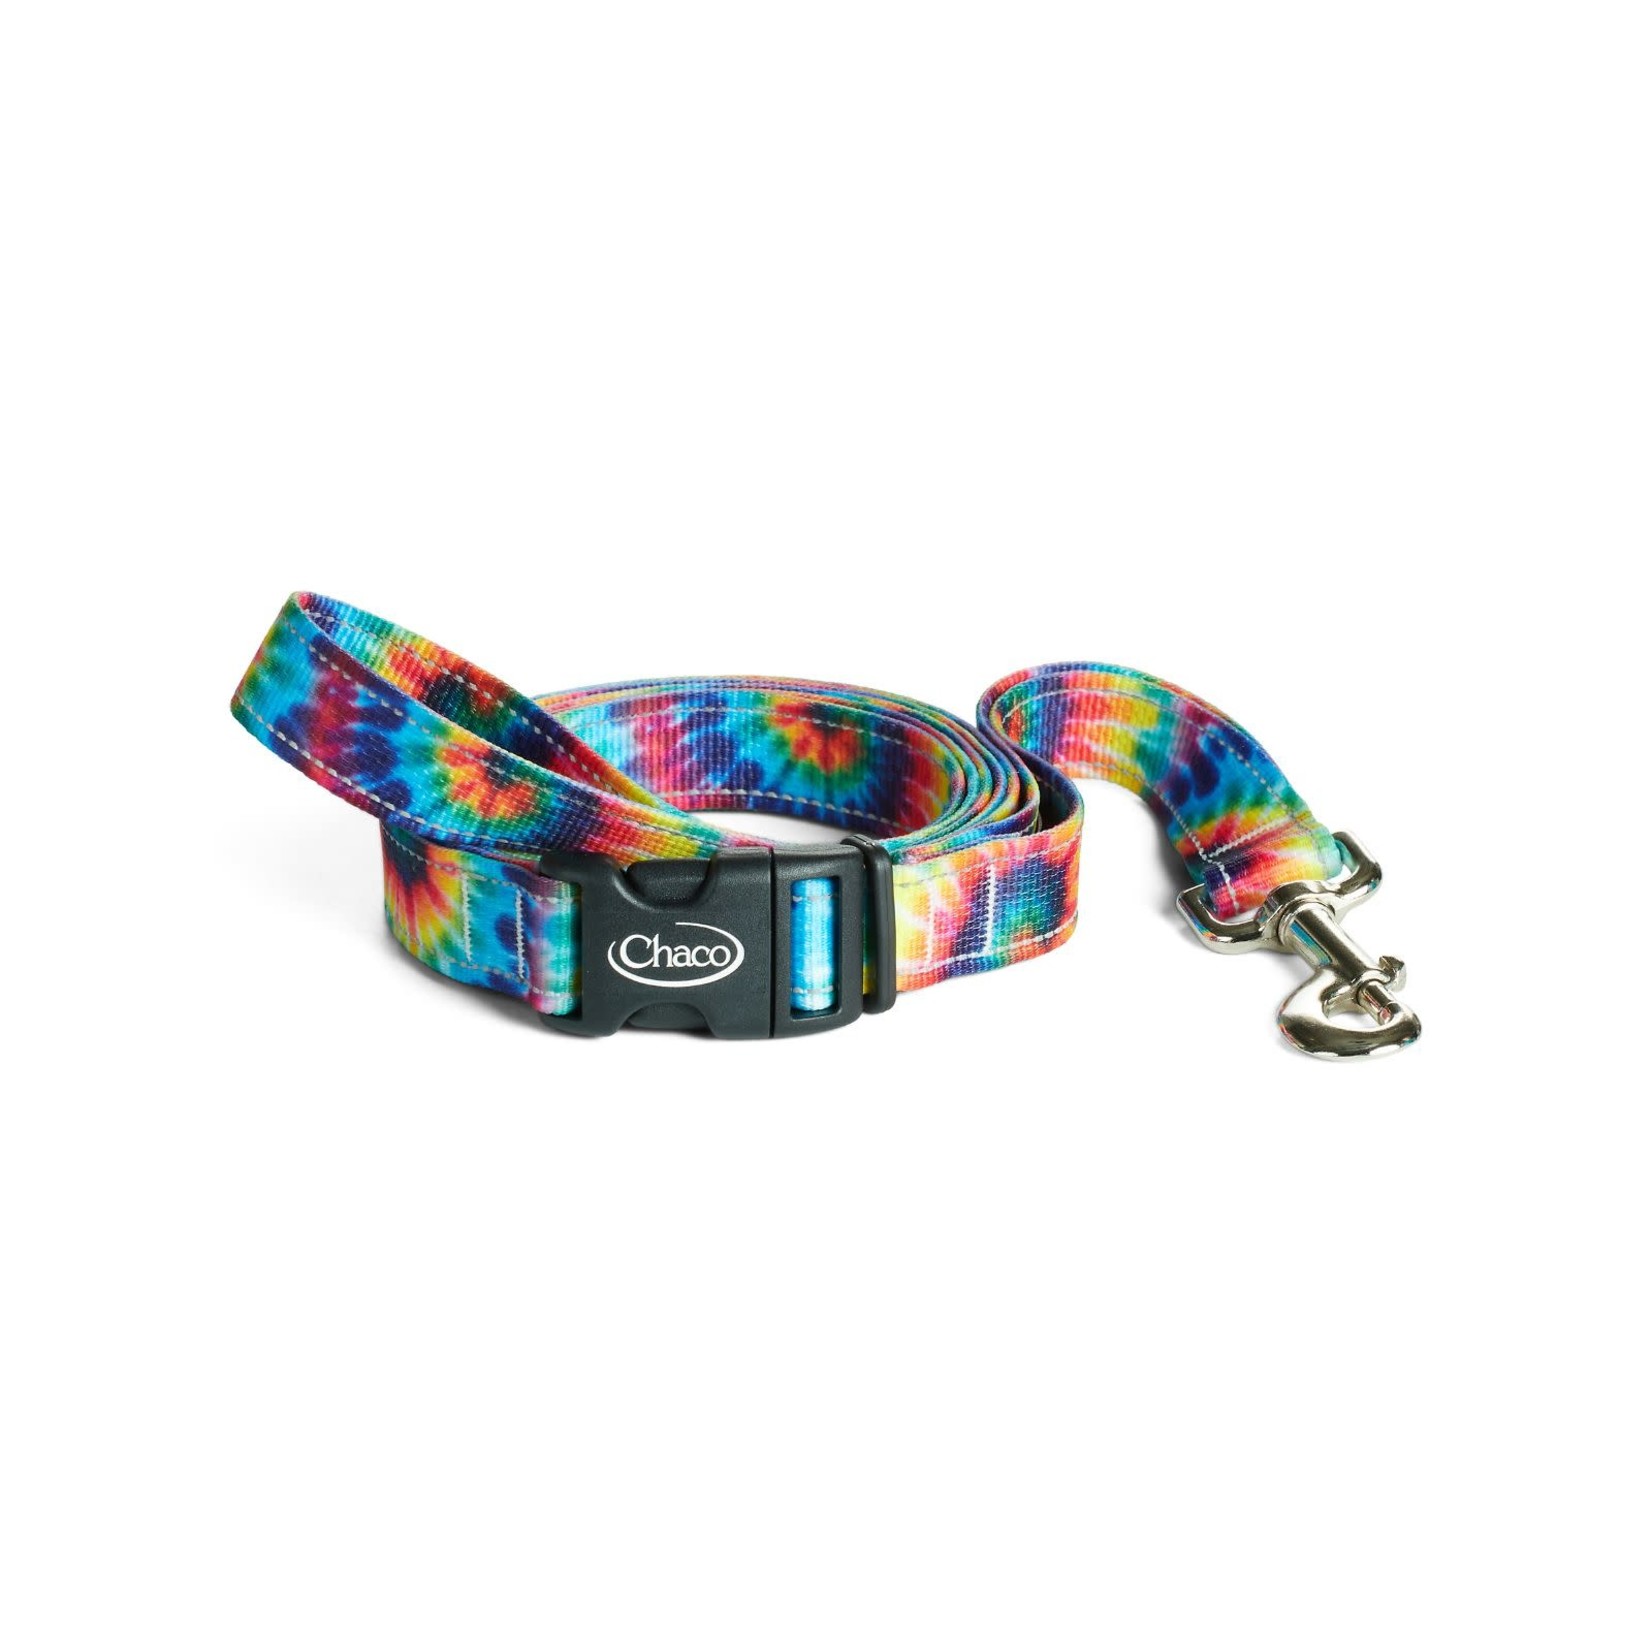 Chaco Chaco Dog Leashes